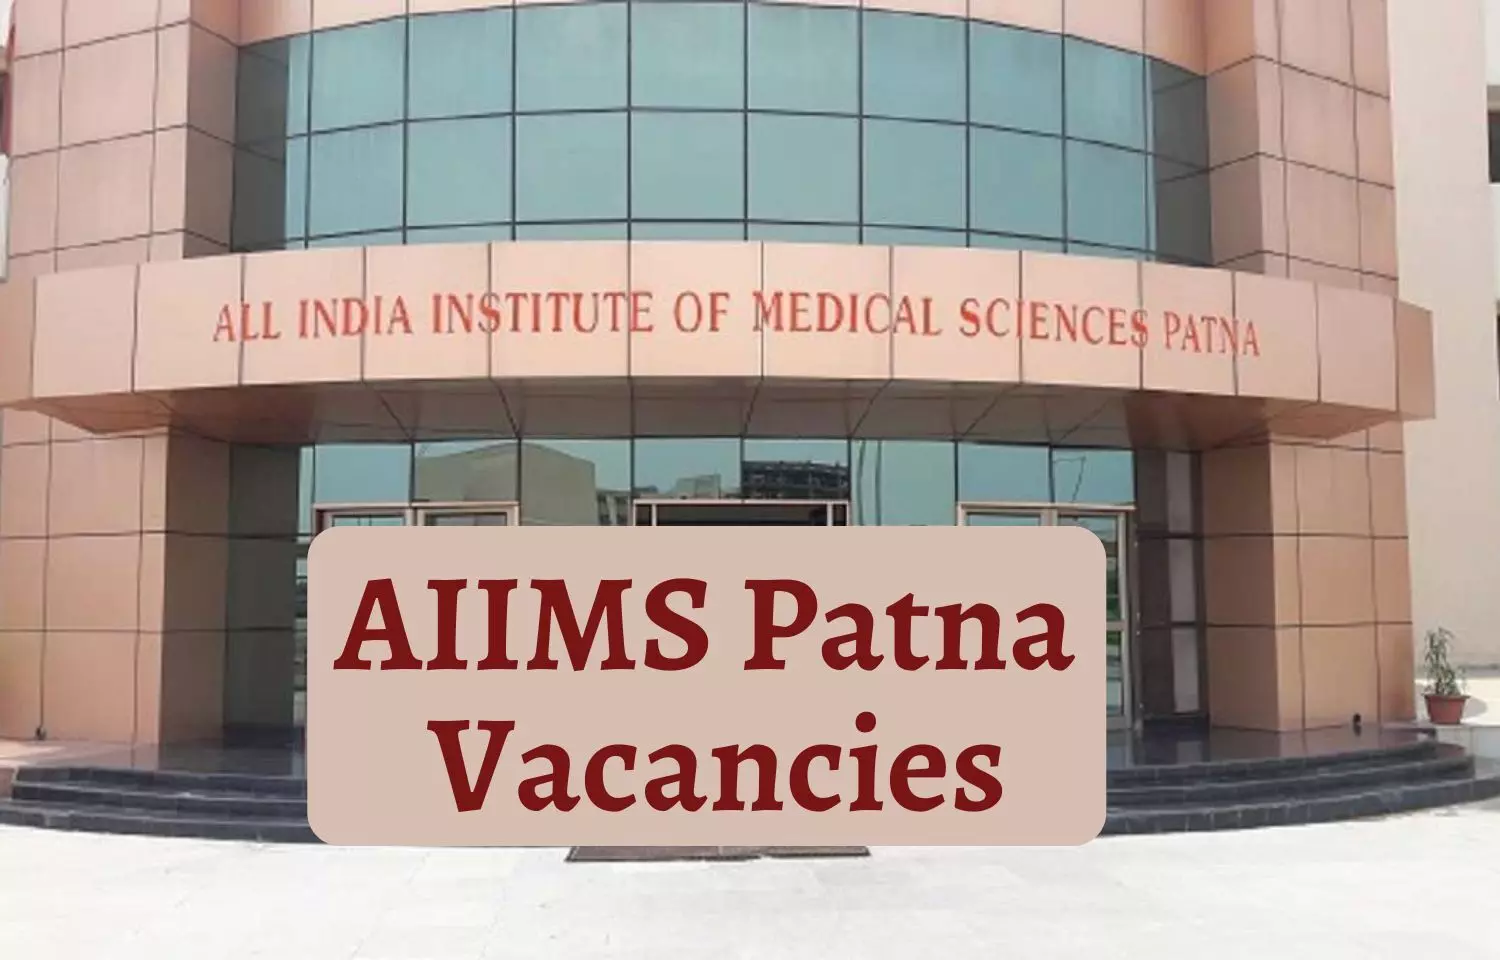 Walk In Interview At AIIMS Patna: Senior Resident Post Vacancies, Check Here All Details